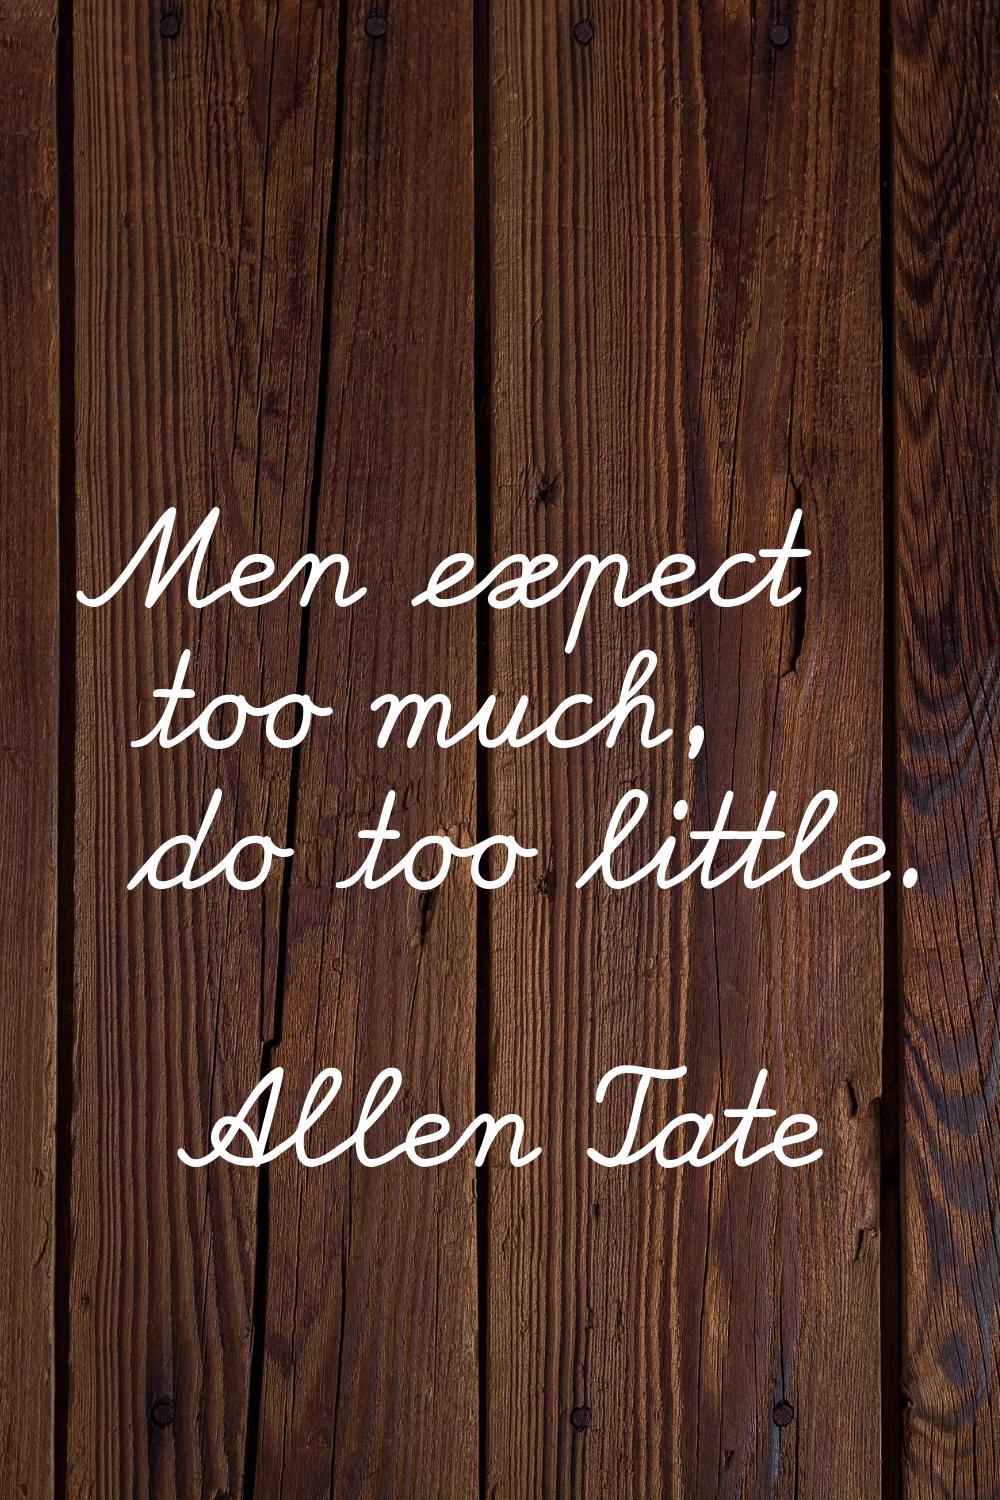 Men expect too much, do too little.